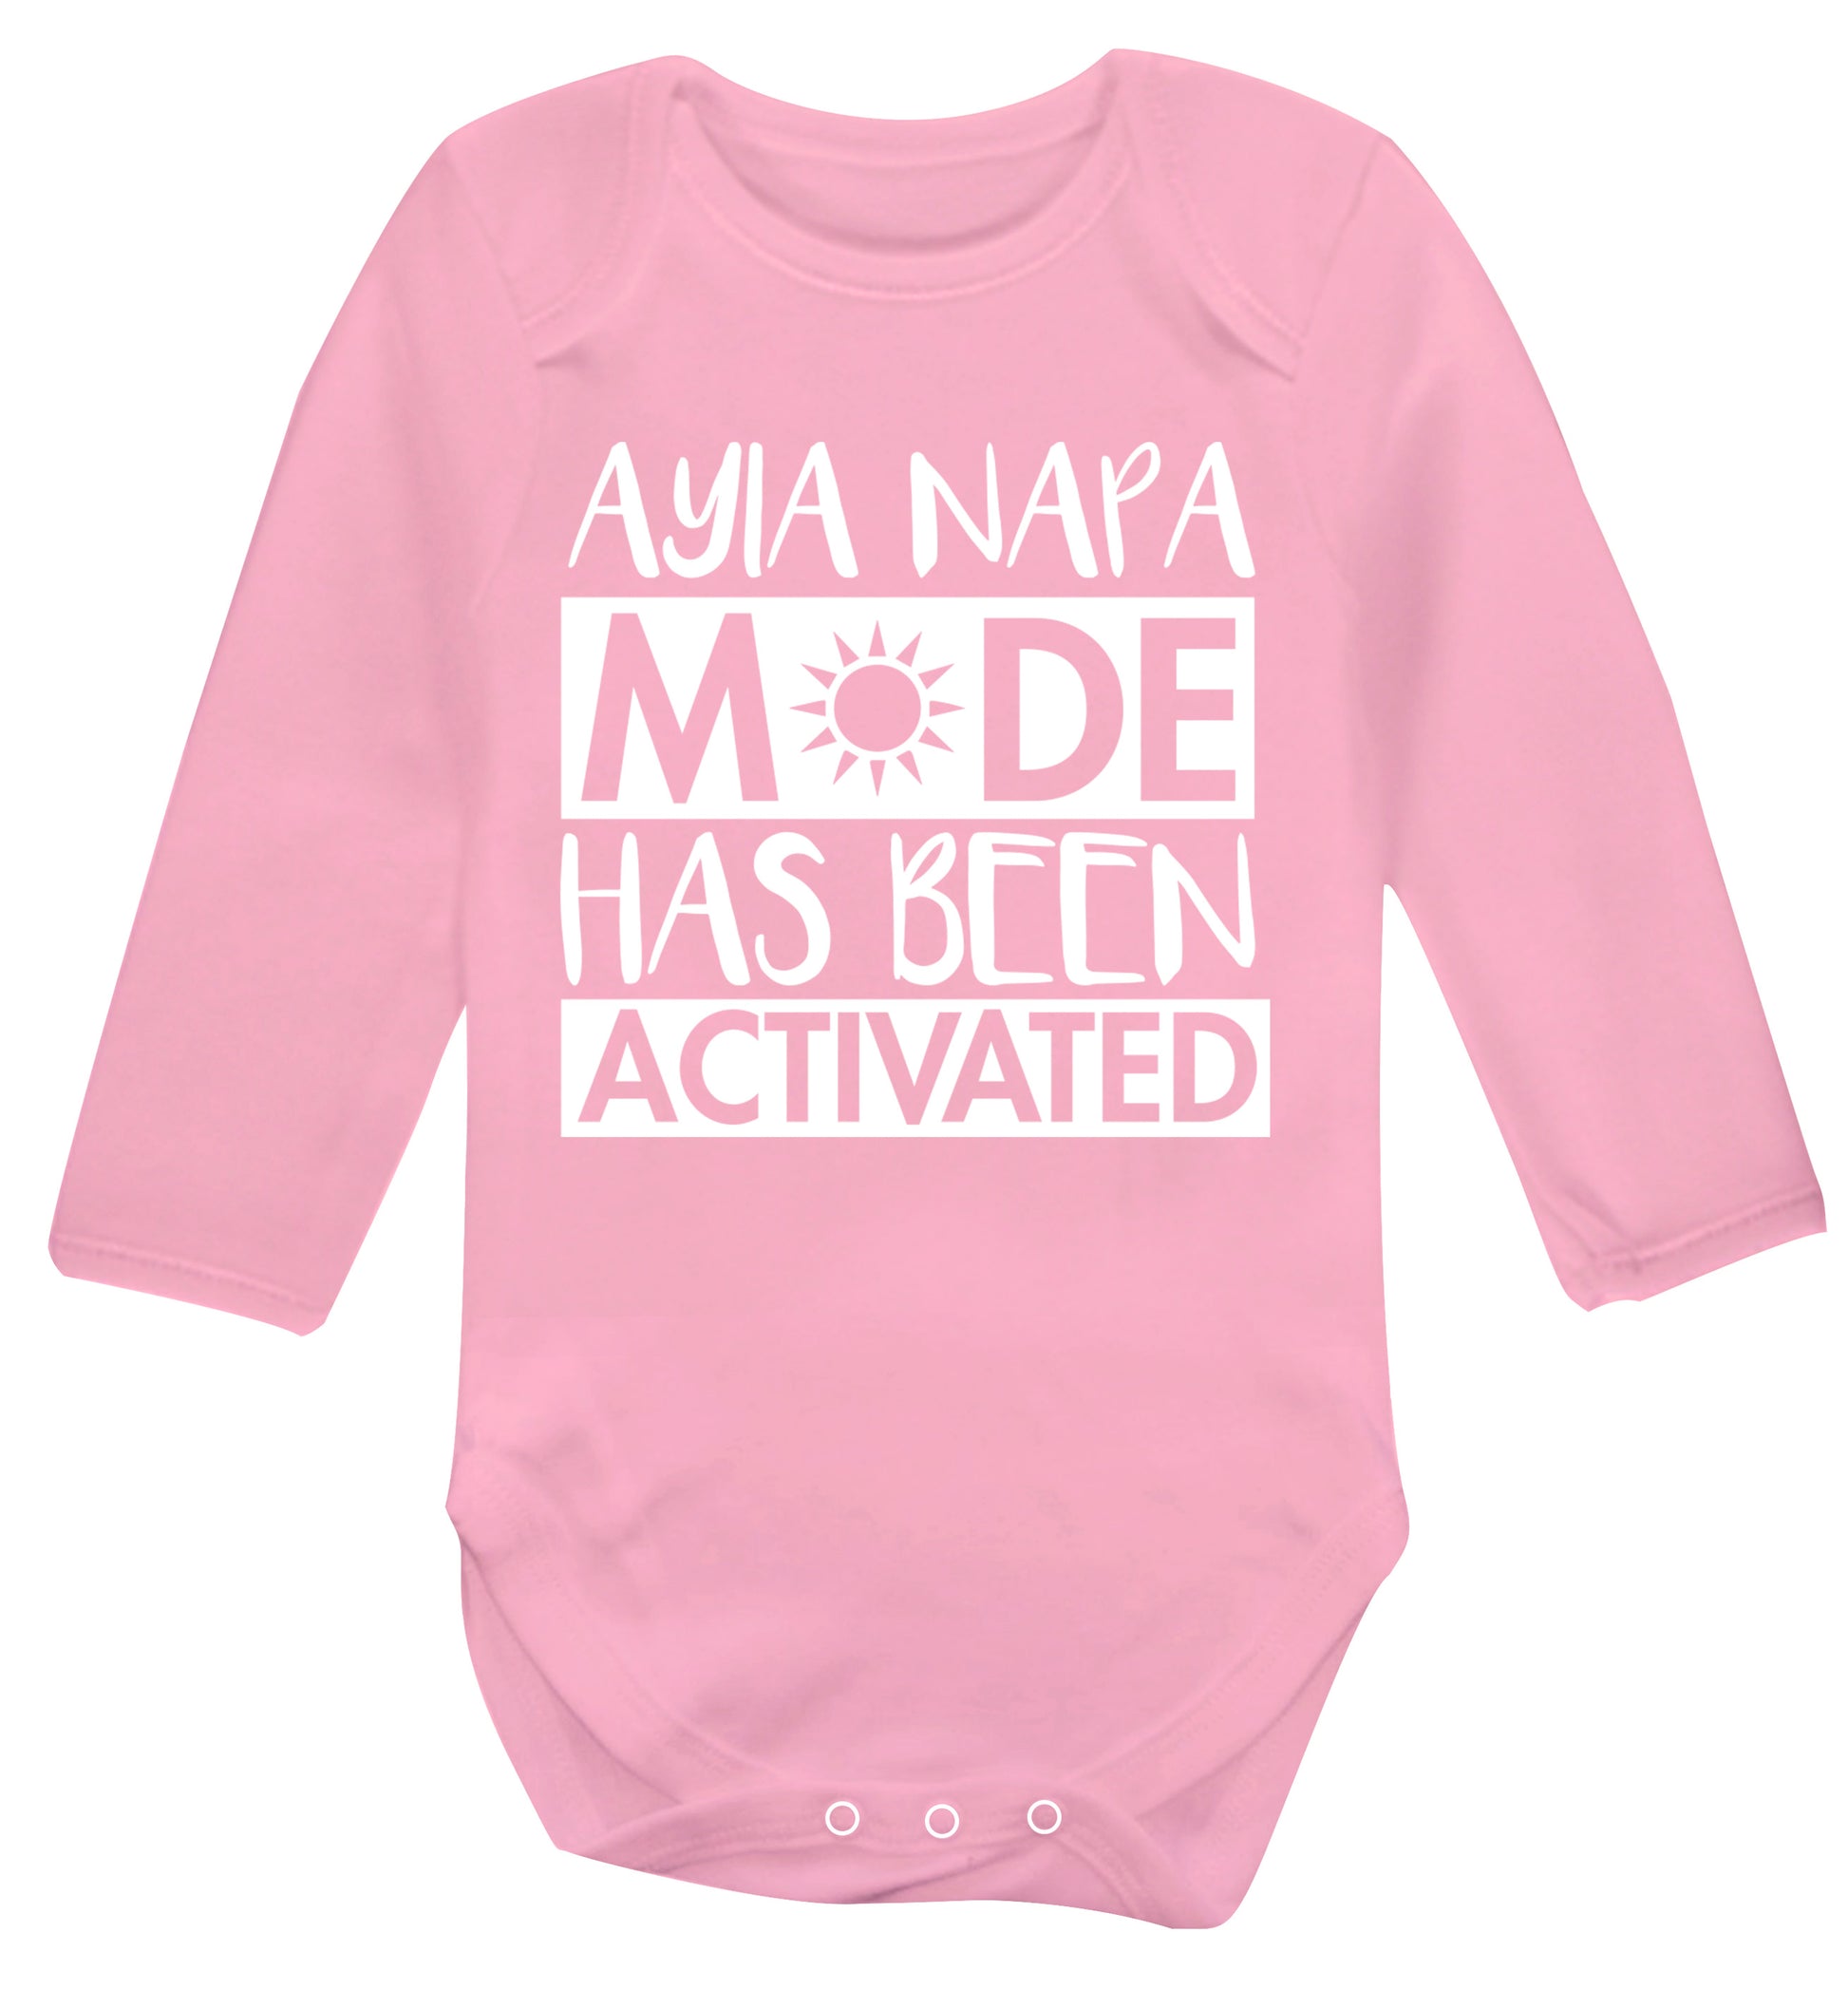 Ayia Napa mode has been activated Baby Vest long sleeved pale pink 6-12 months